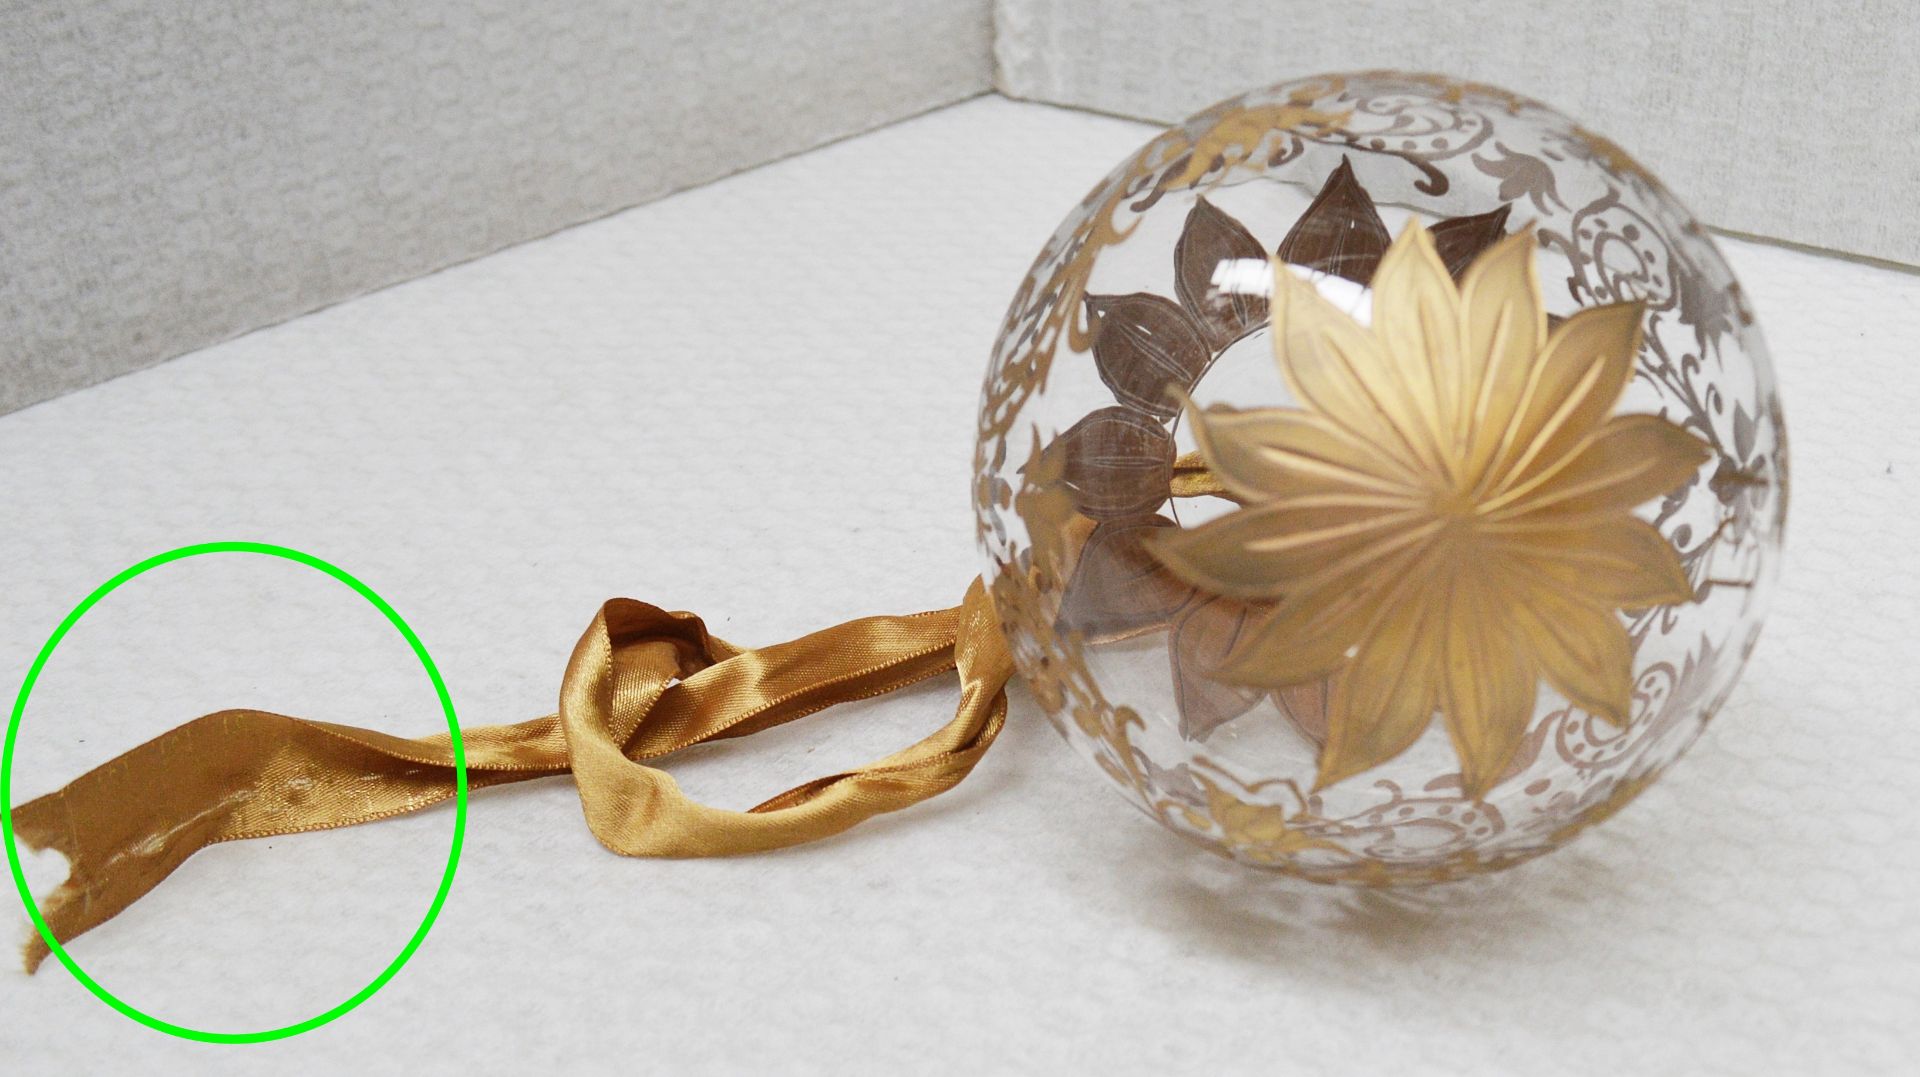 1 x BALDI 'Home Jewels' Italian Hand-crafted Artisan Christmas Tree Decoration In Gold - Dimensions: - Image 4 of 4